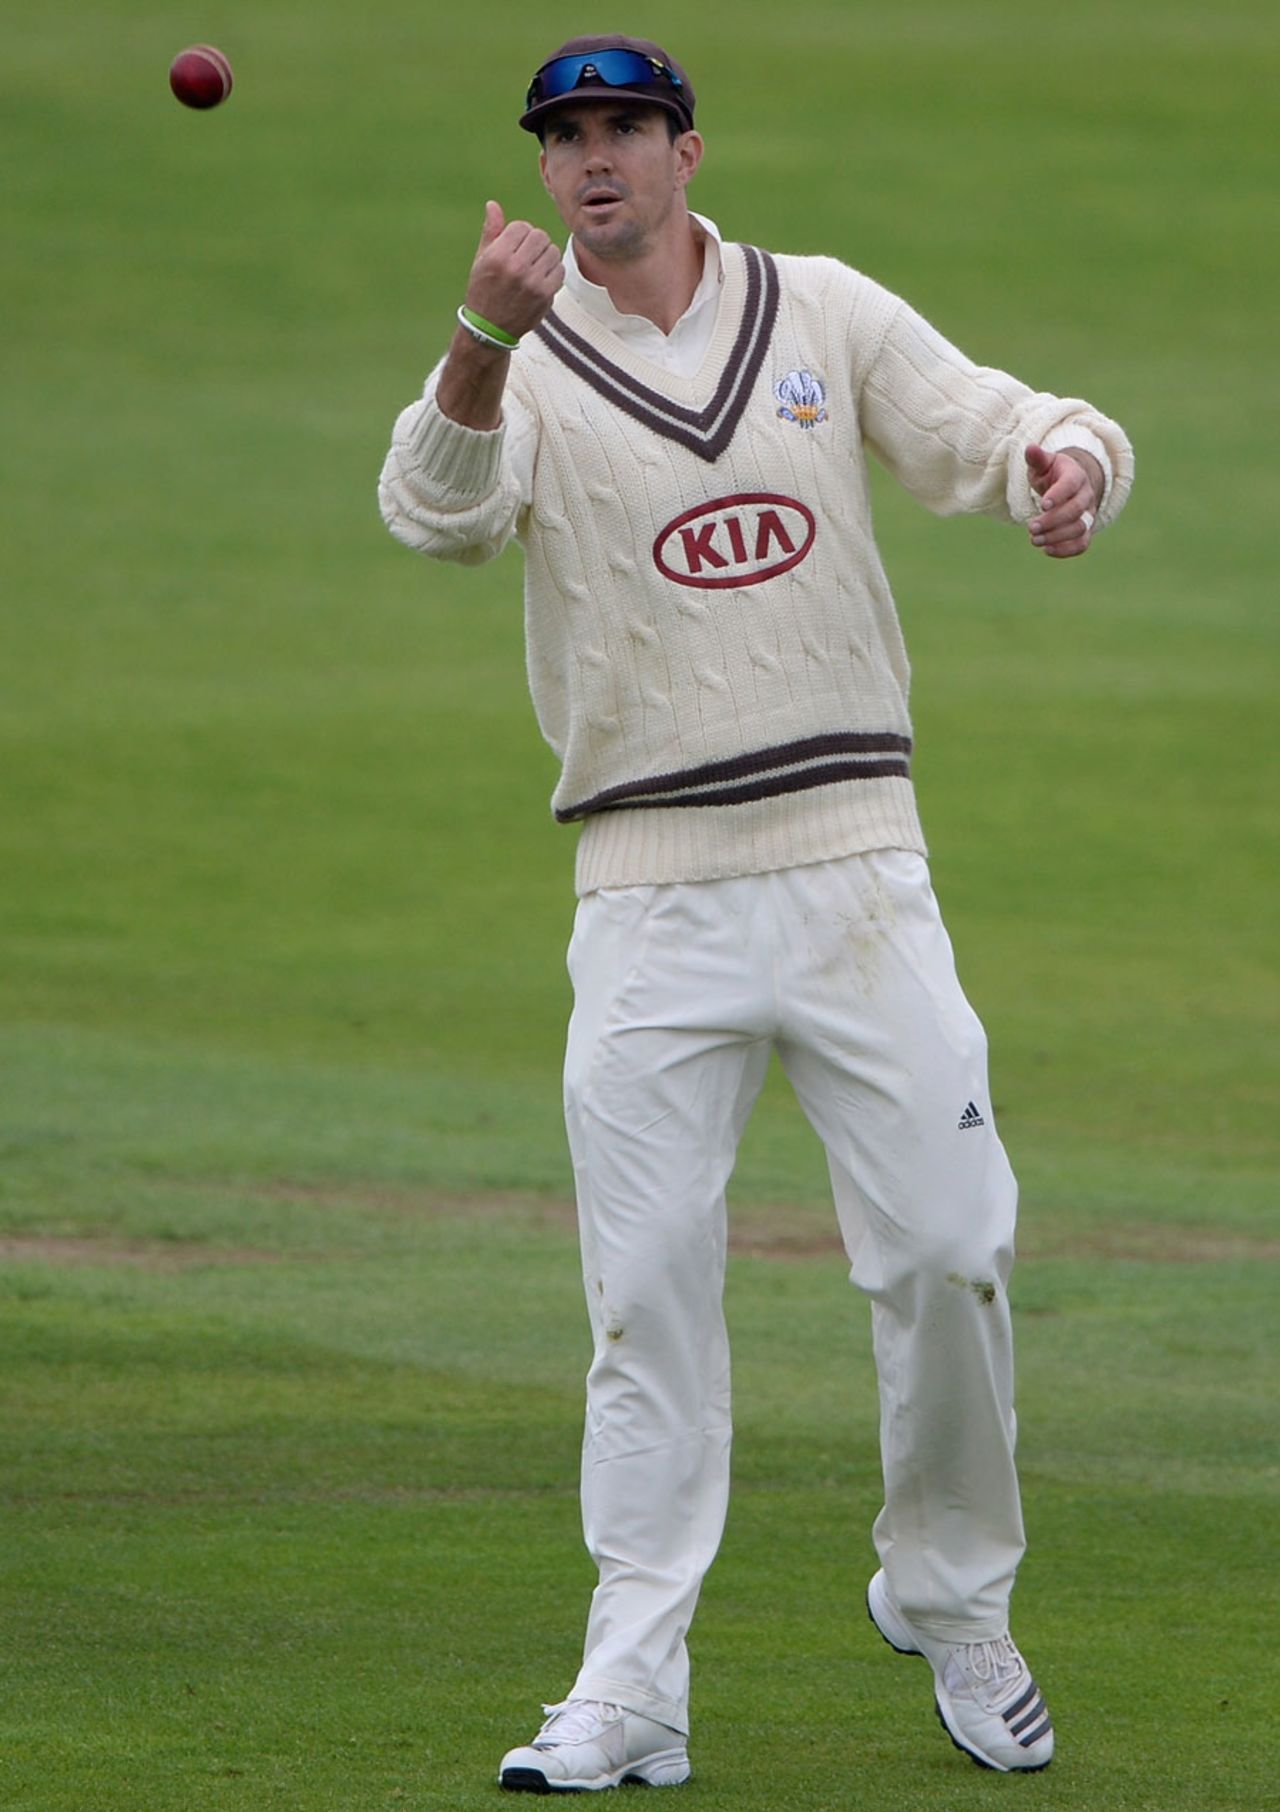 Kevin Pietersen tosses the ball back to the bowler, Yorkshire v Surrey, County Championship, Division One, Headingley, 1st day, June 21, 2013